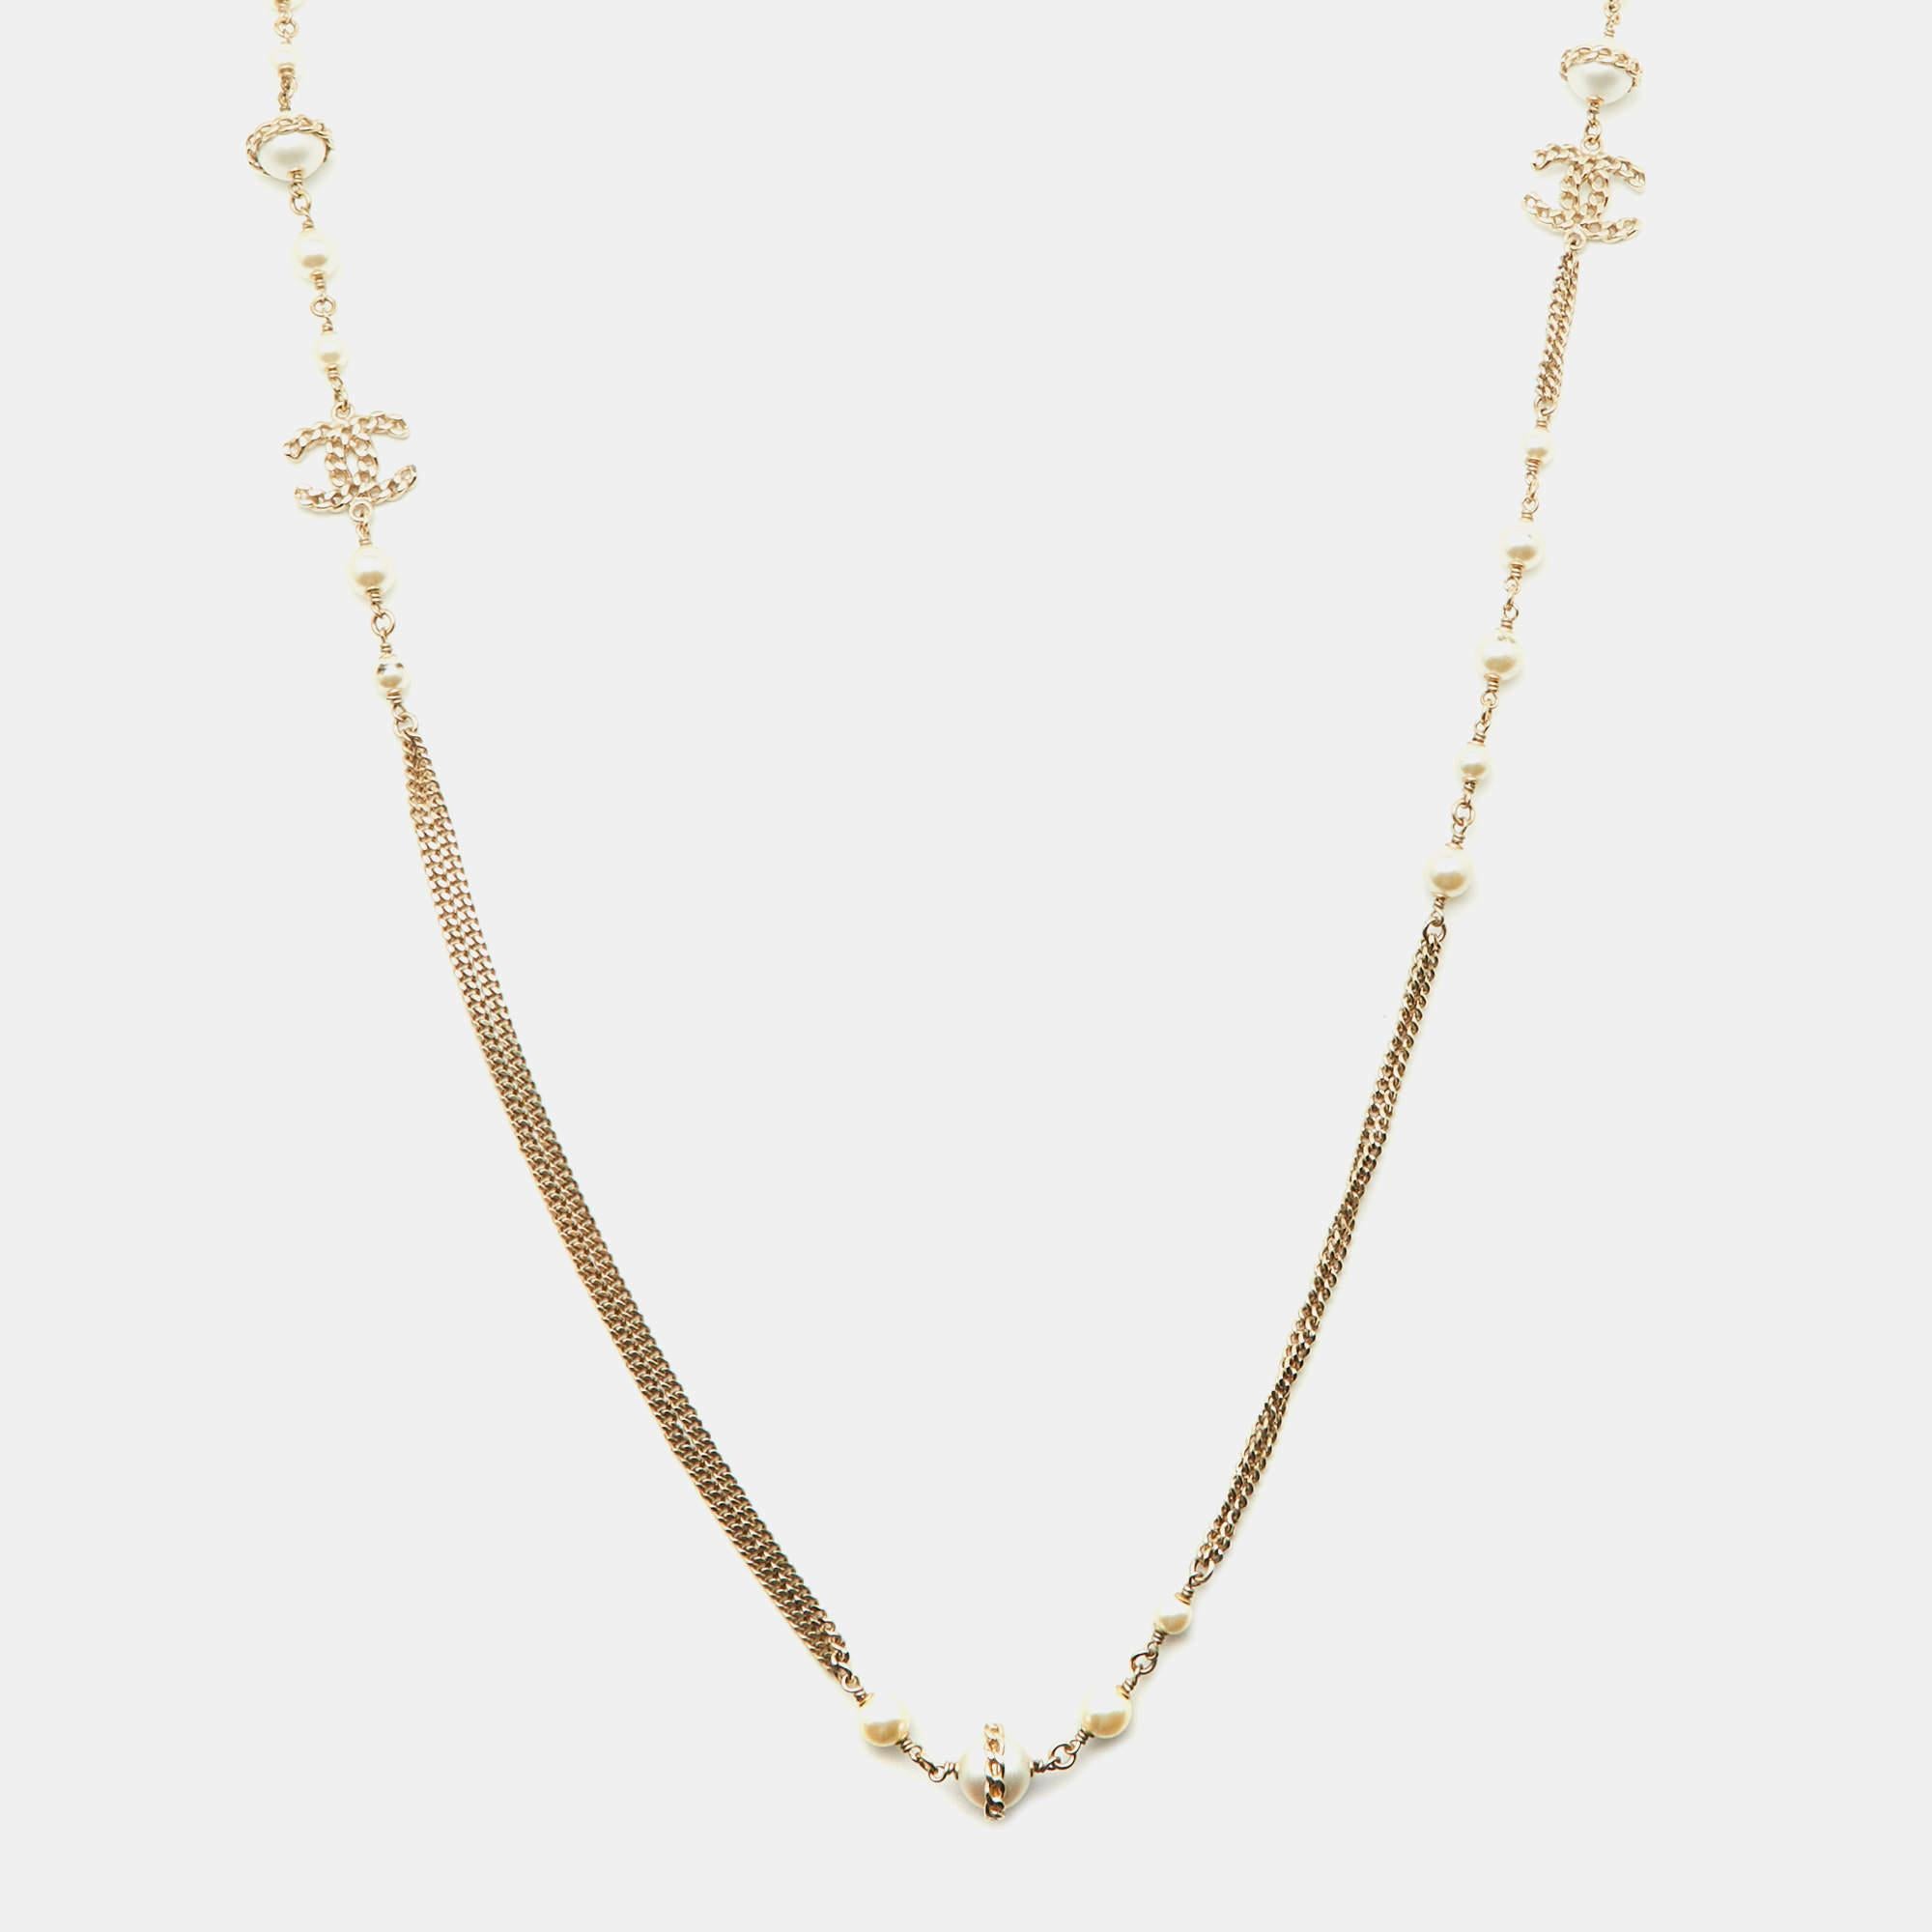 Meticulously crafted from gold-tone metal, this elegant and chic necklace by Chanel is an exquisite piece worth possessing. Brimming with high creativity, the design involves a chain-link detailed with faux pearls and embellished CC logos. The